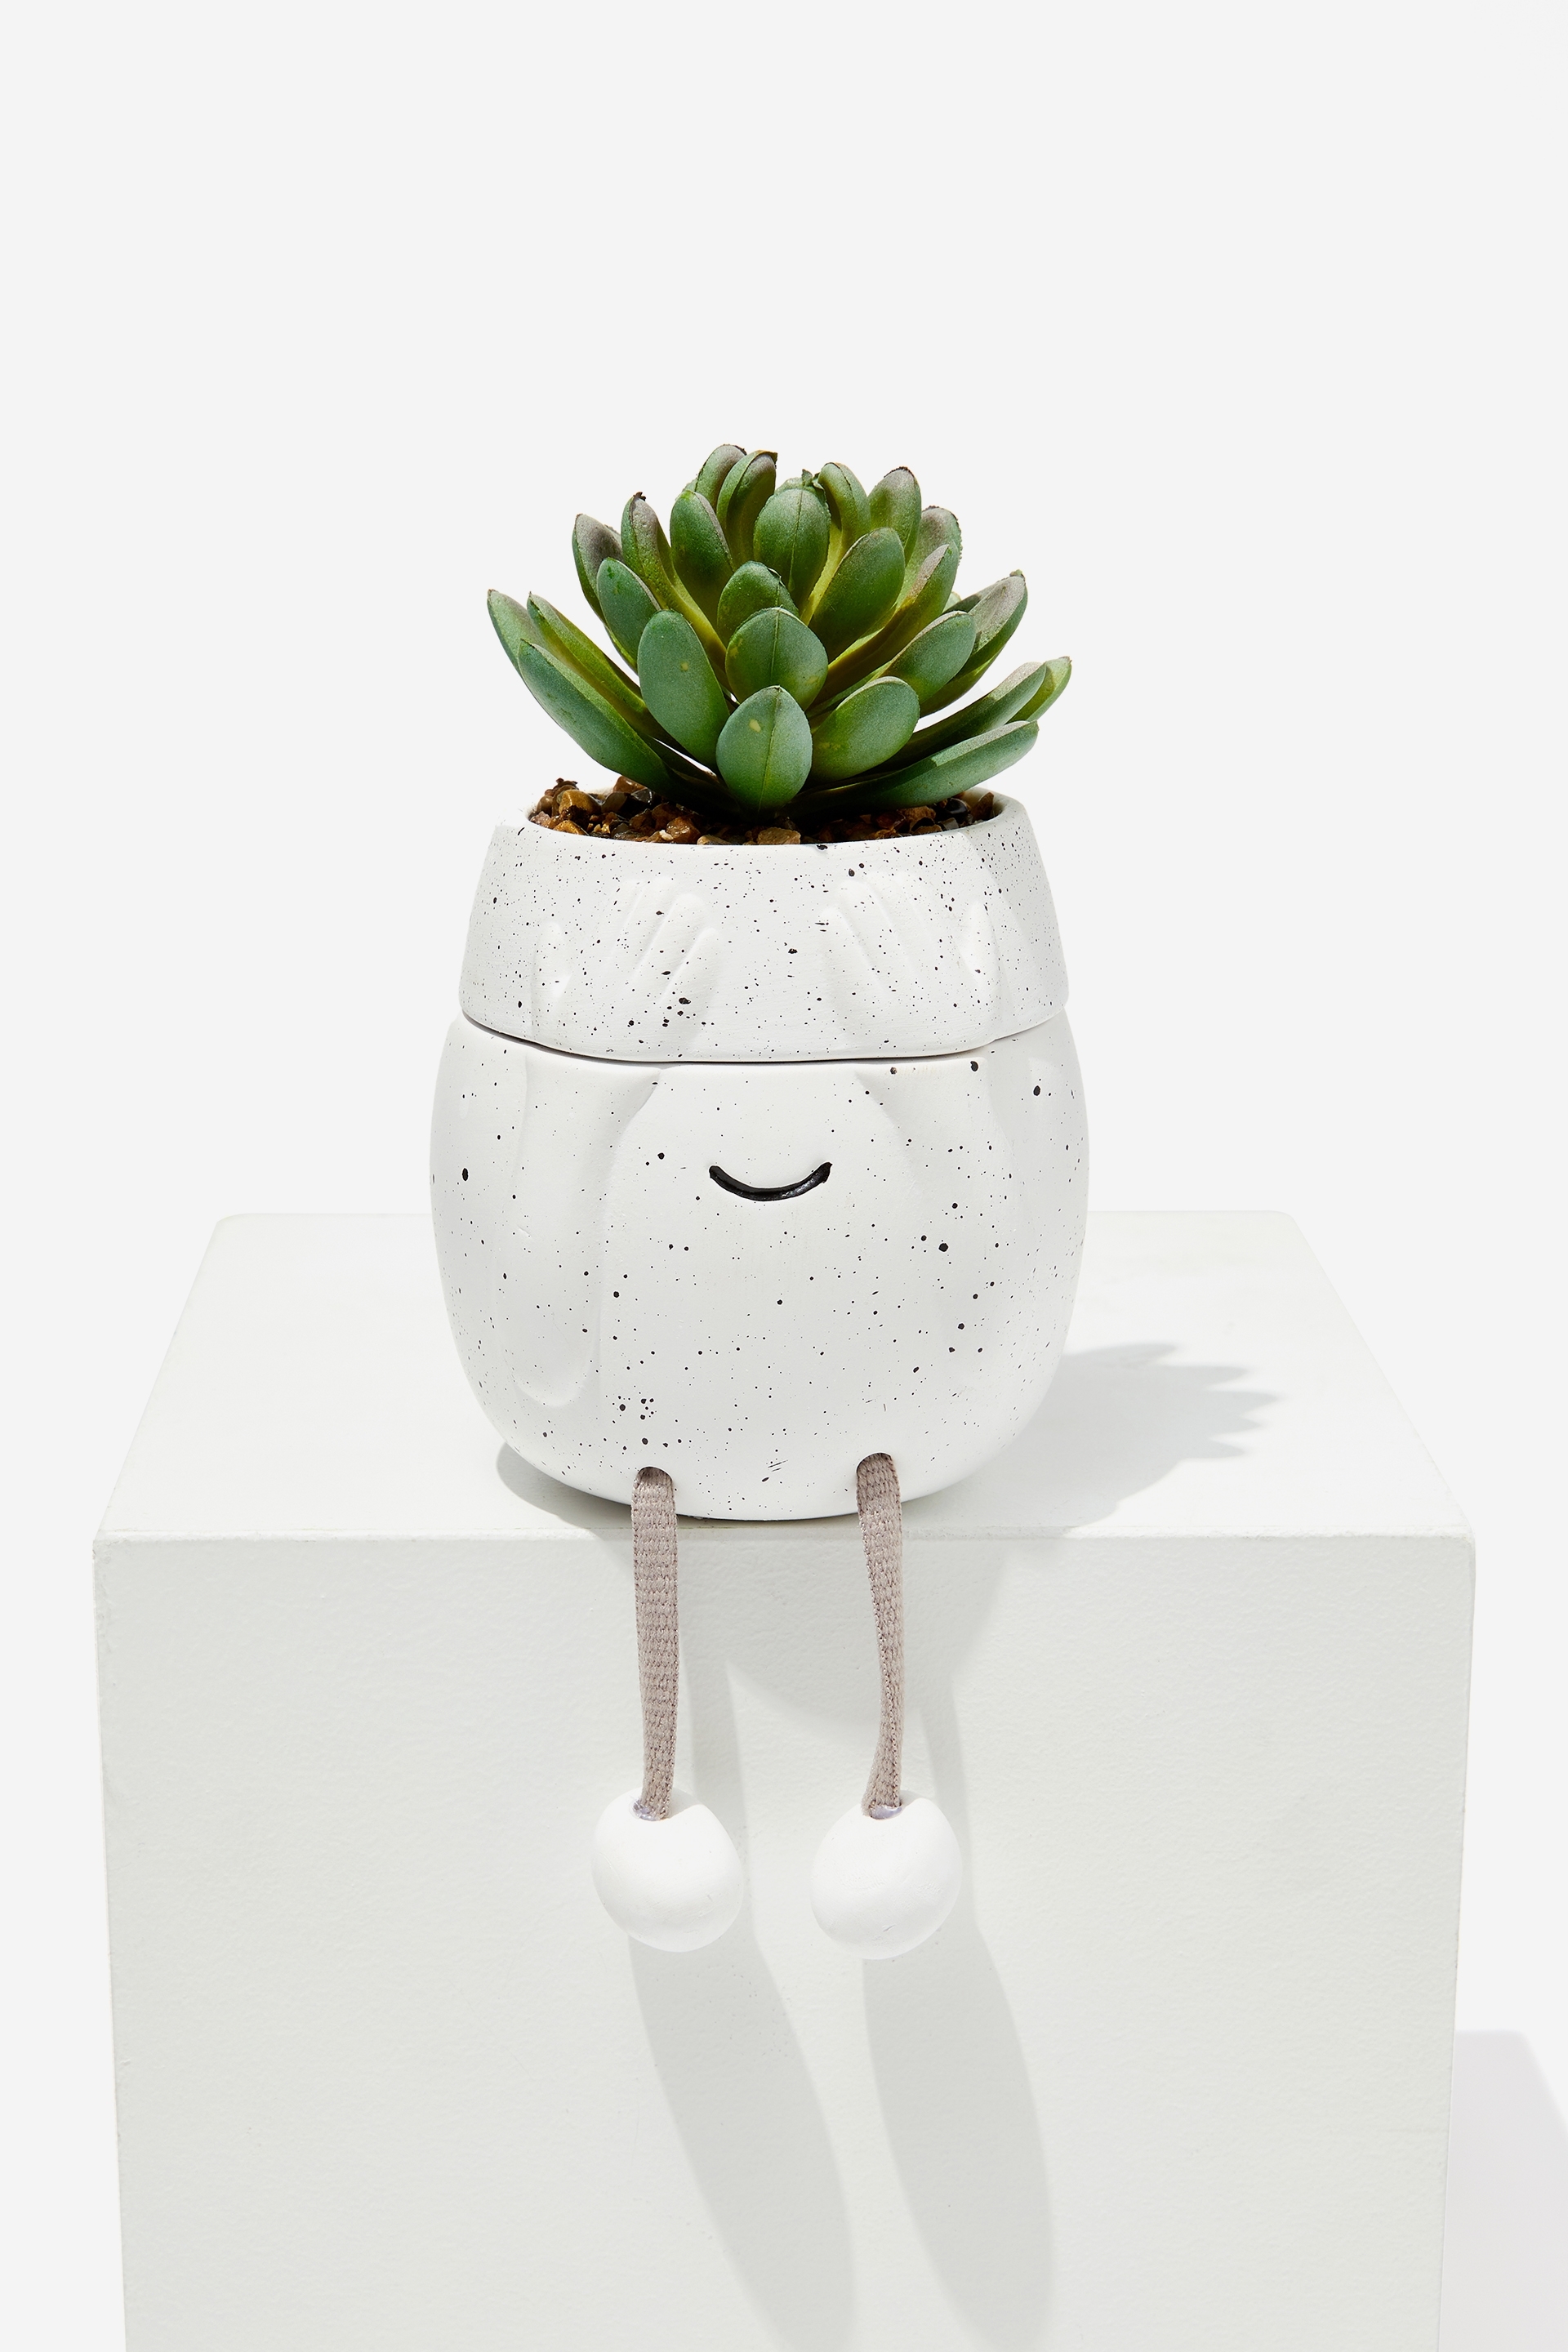 Typo - Stashed Away Mini Planter - White speckle face rope legs